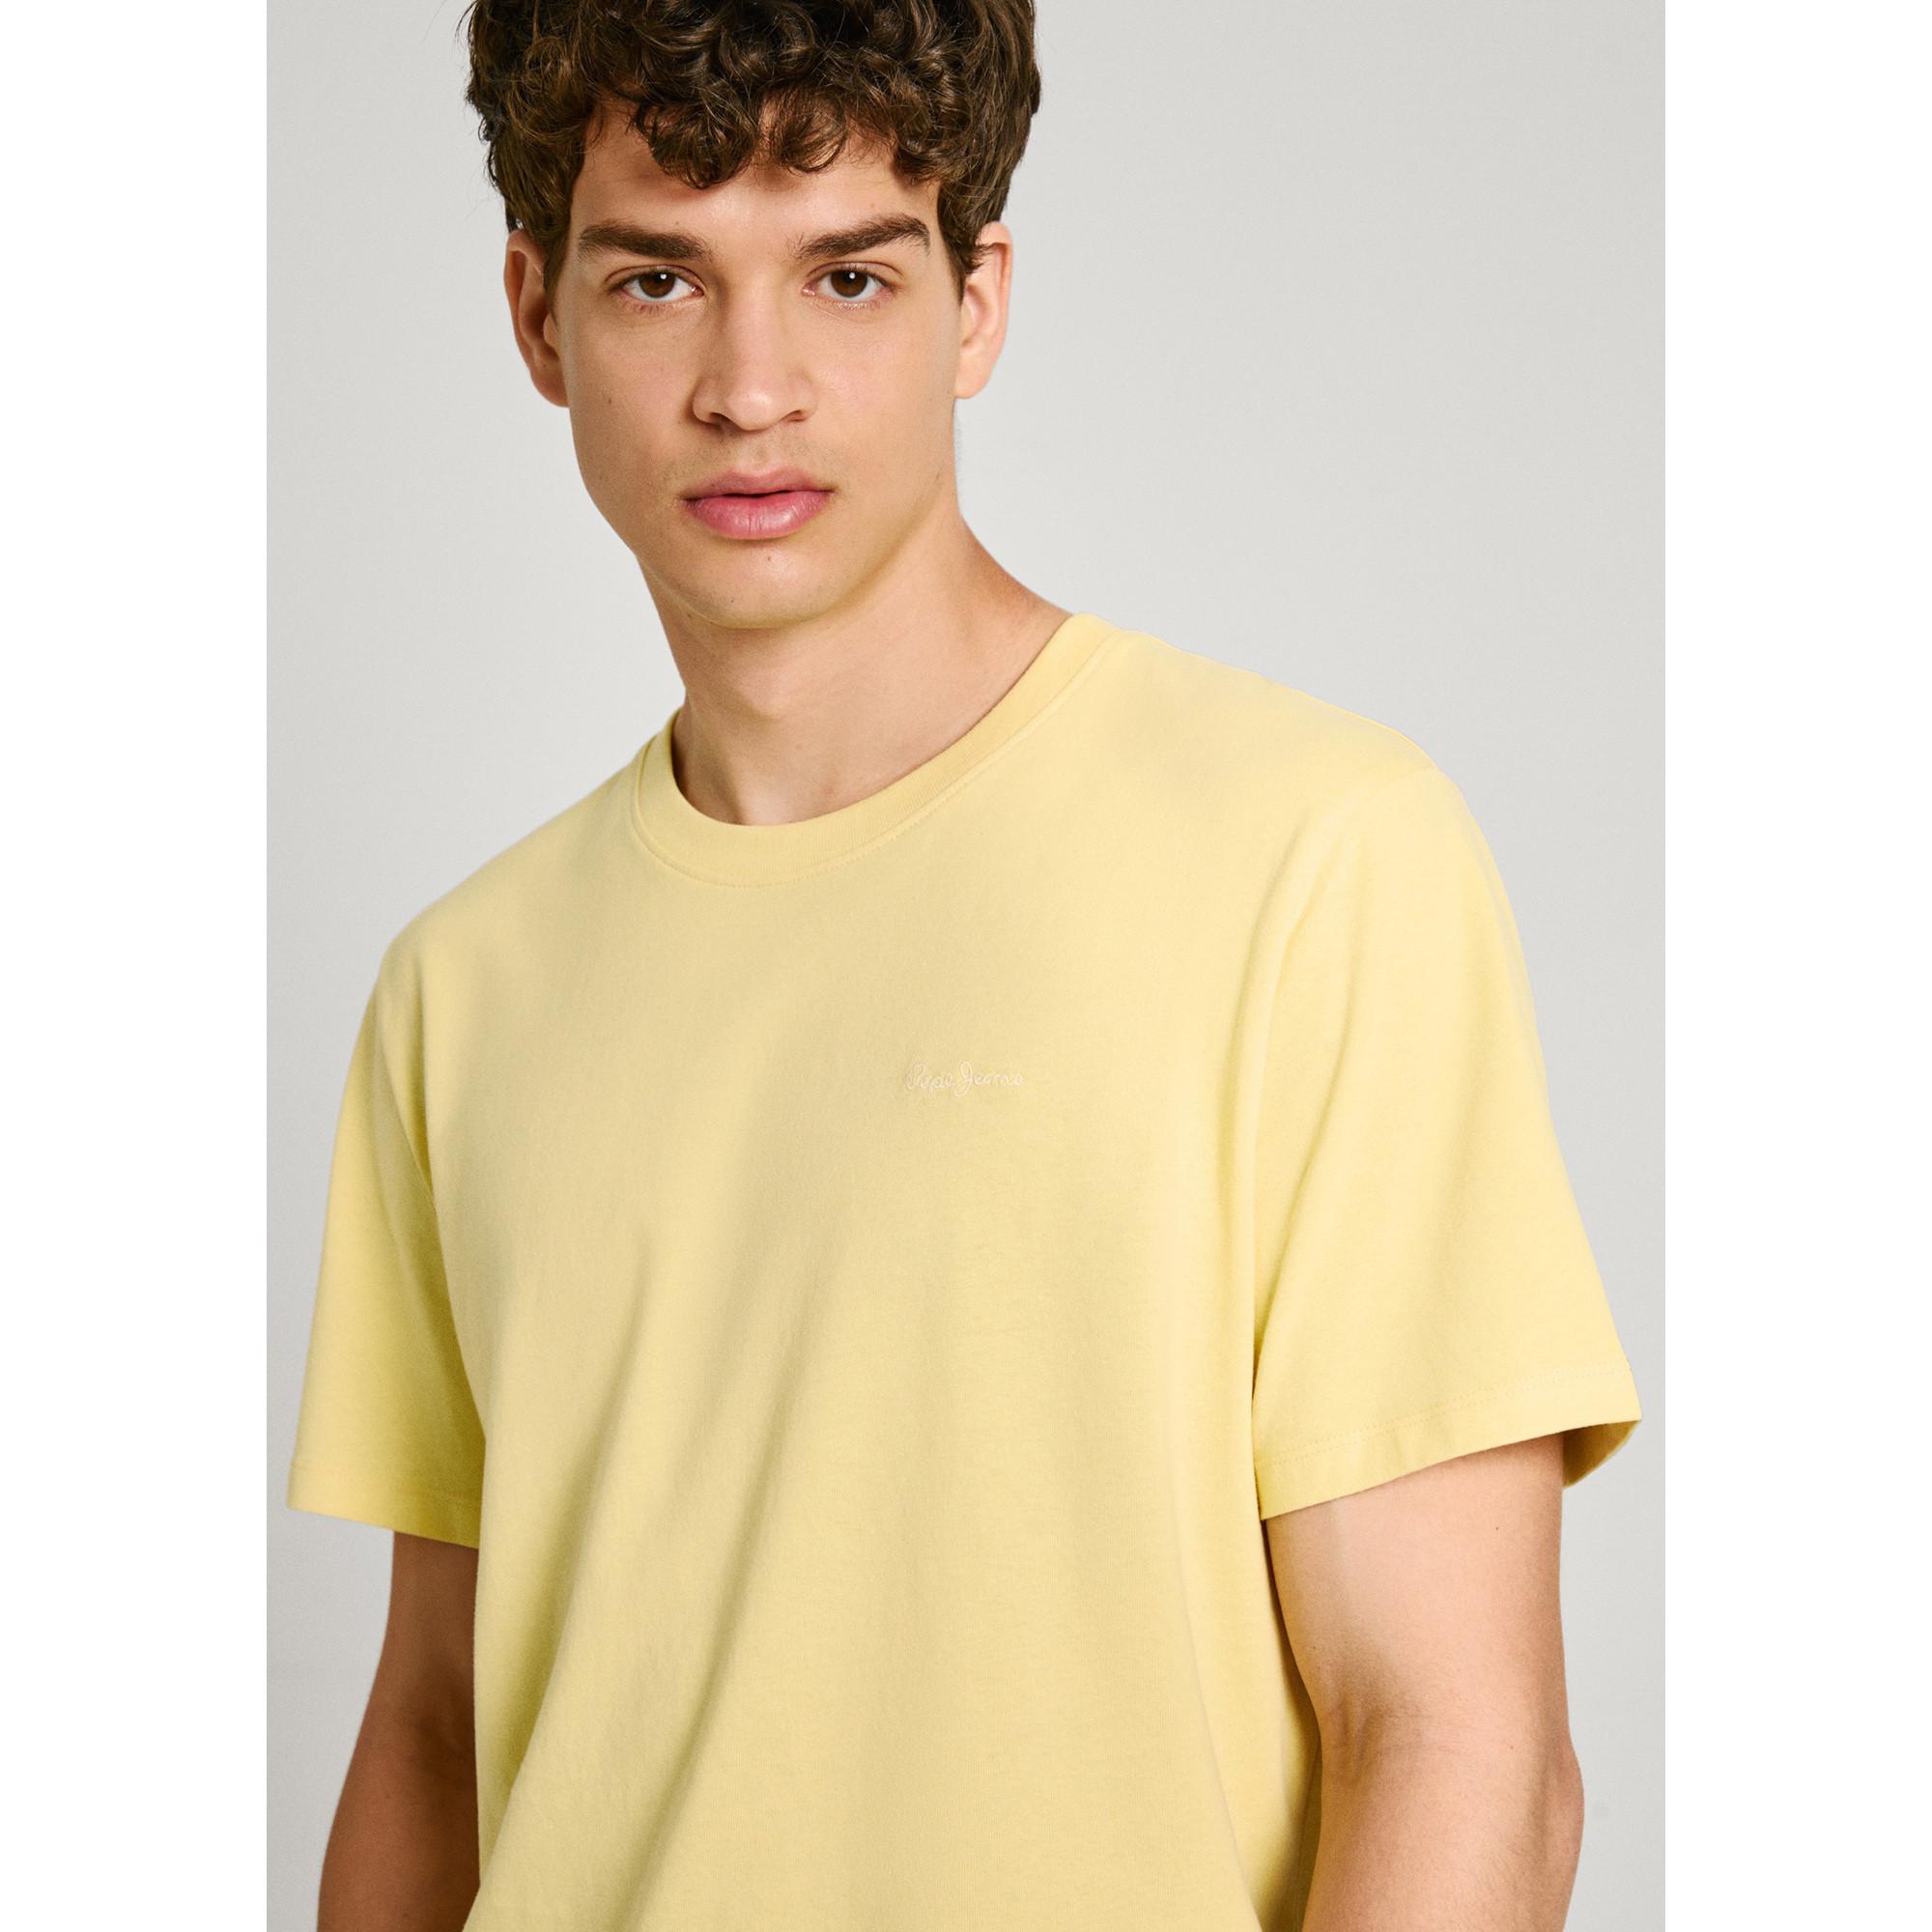 Pepe Jeans CONNOR T-shirt 